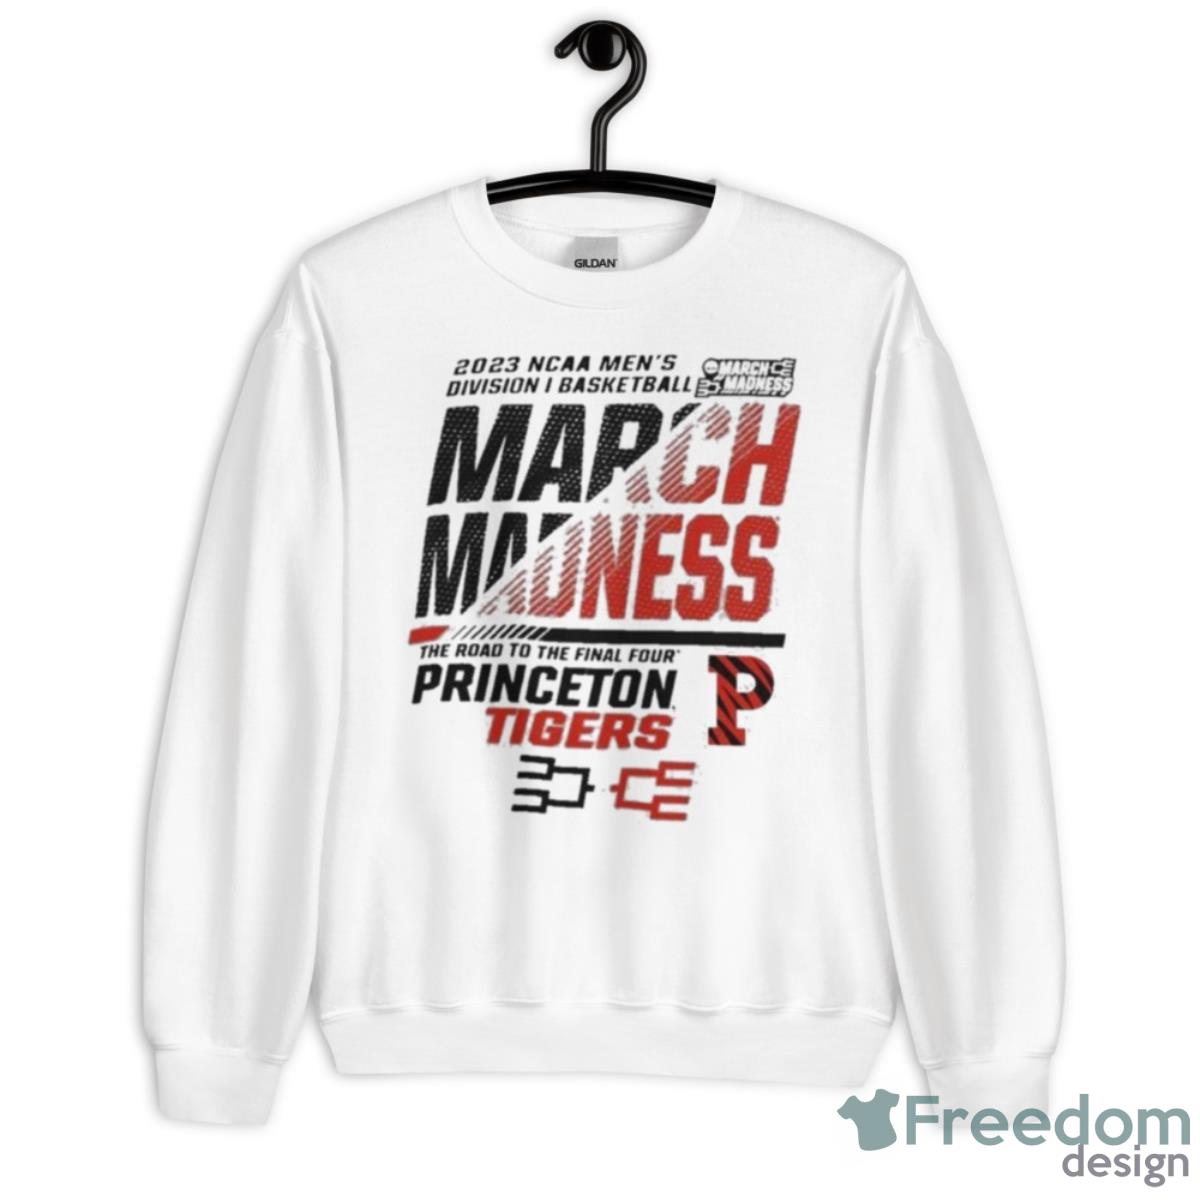 Princeton Men’s Basketball 2023 NCAA March Madness The Road To Final Four Shirt